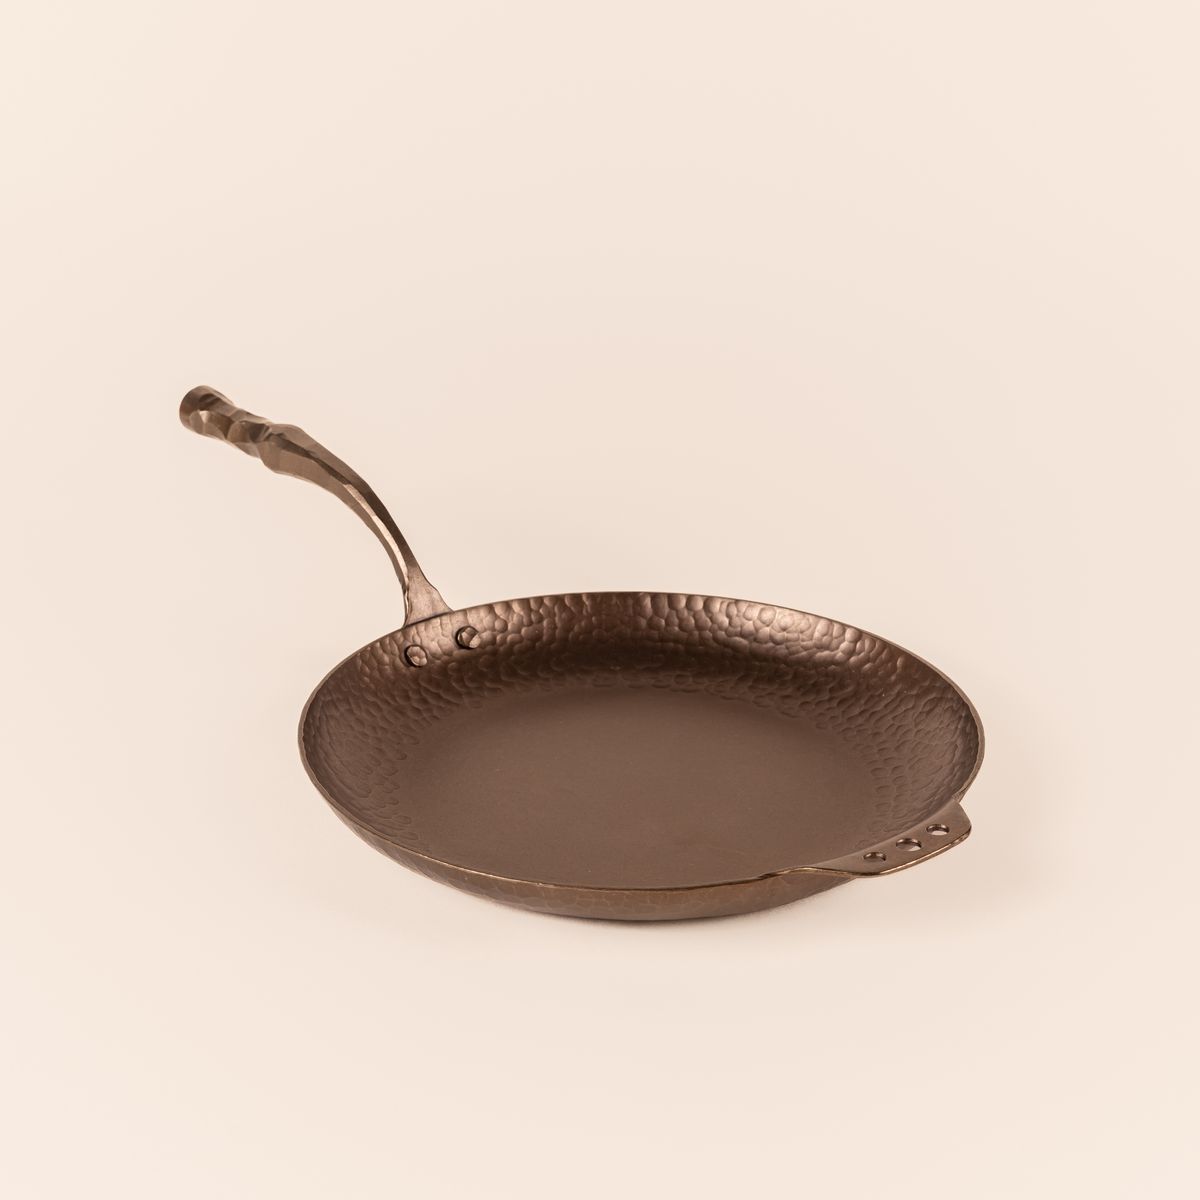 A carbon steel farmhouse skillet with a hammered texture and hand forged design